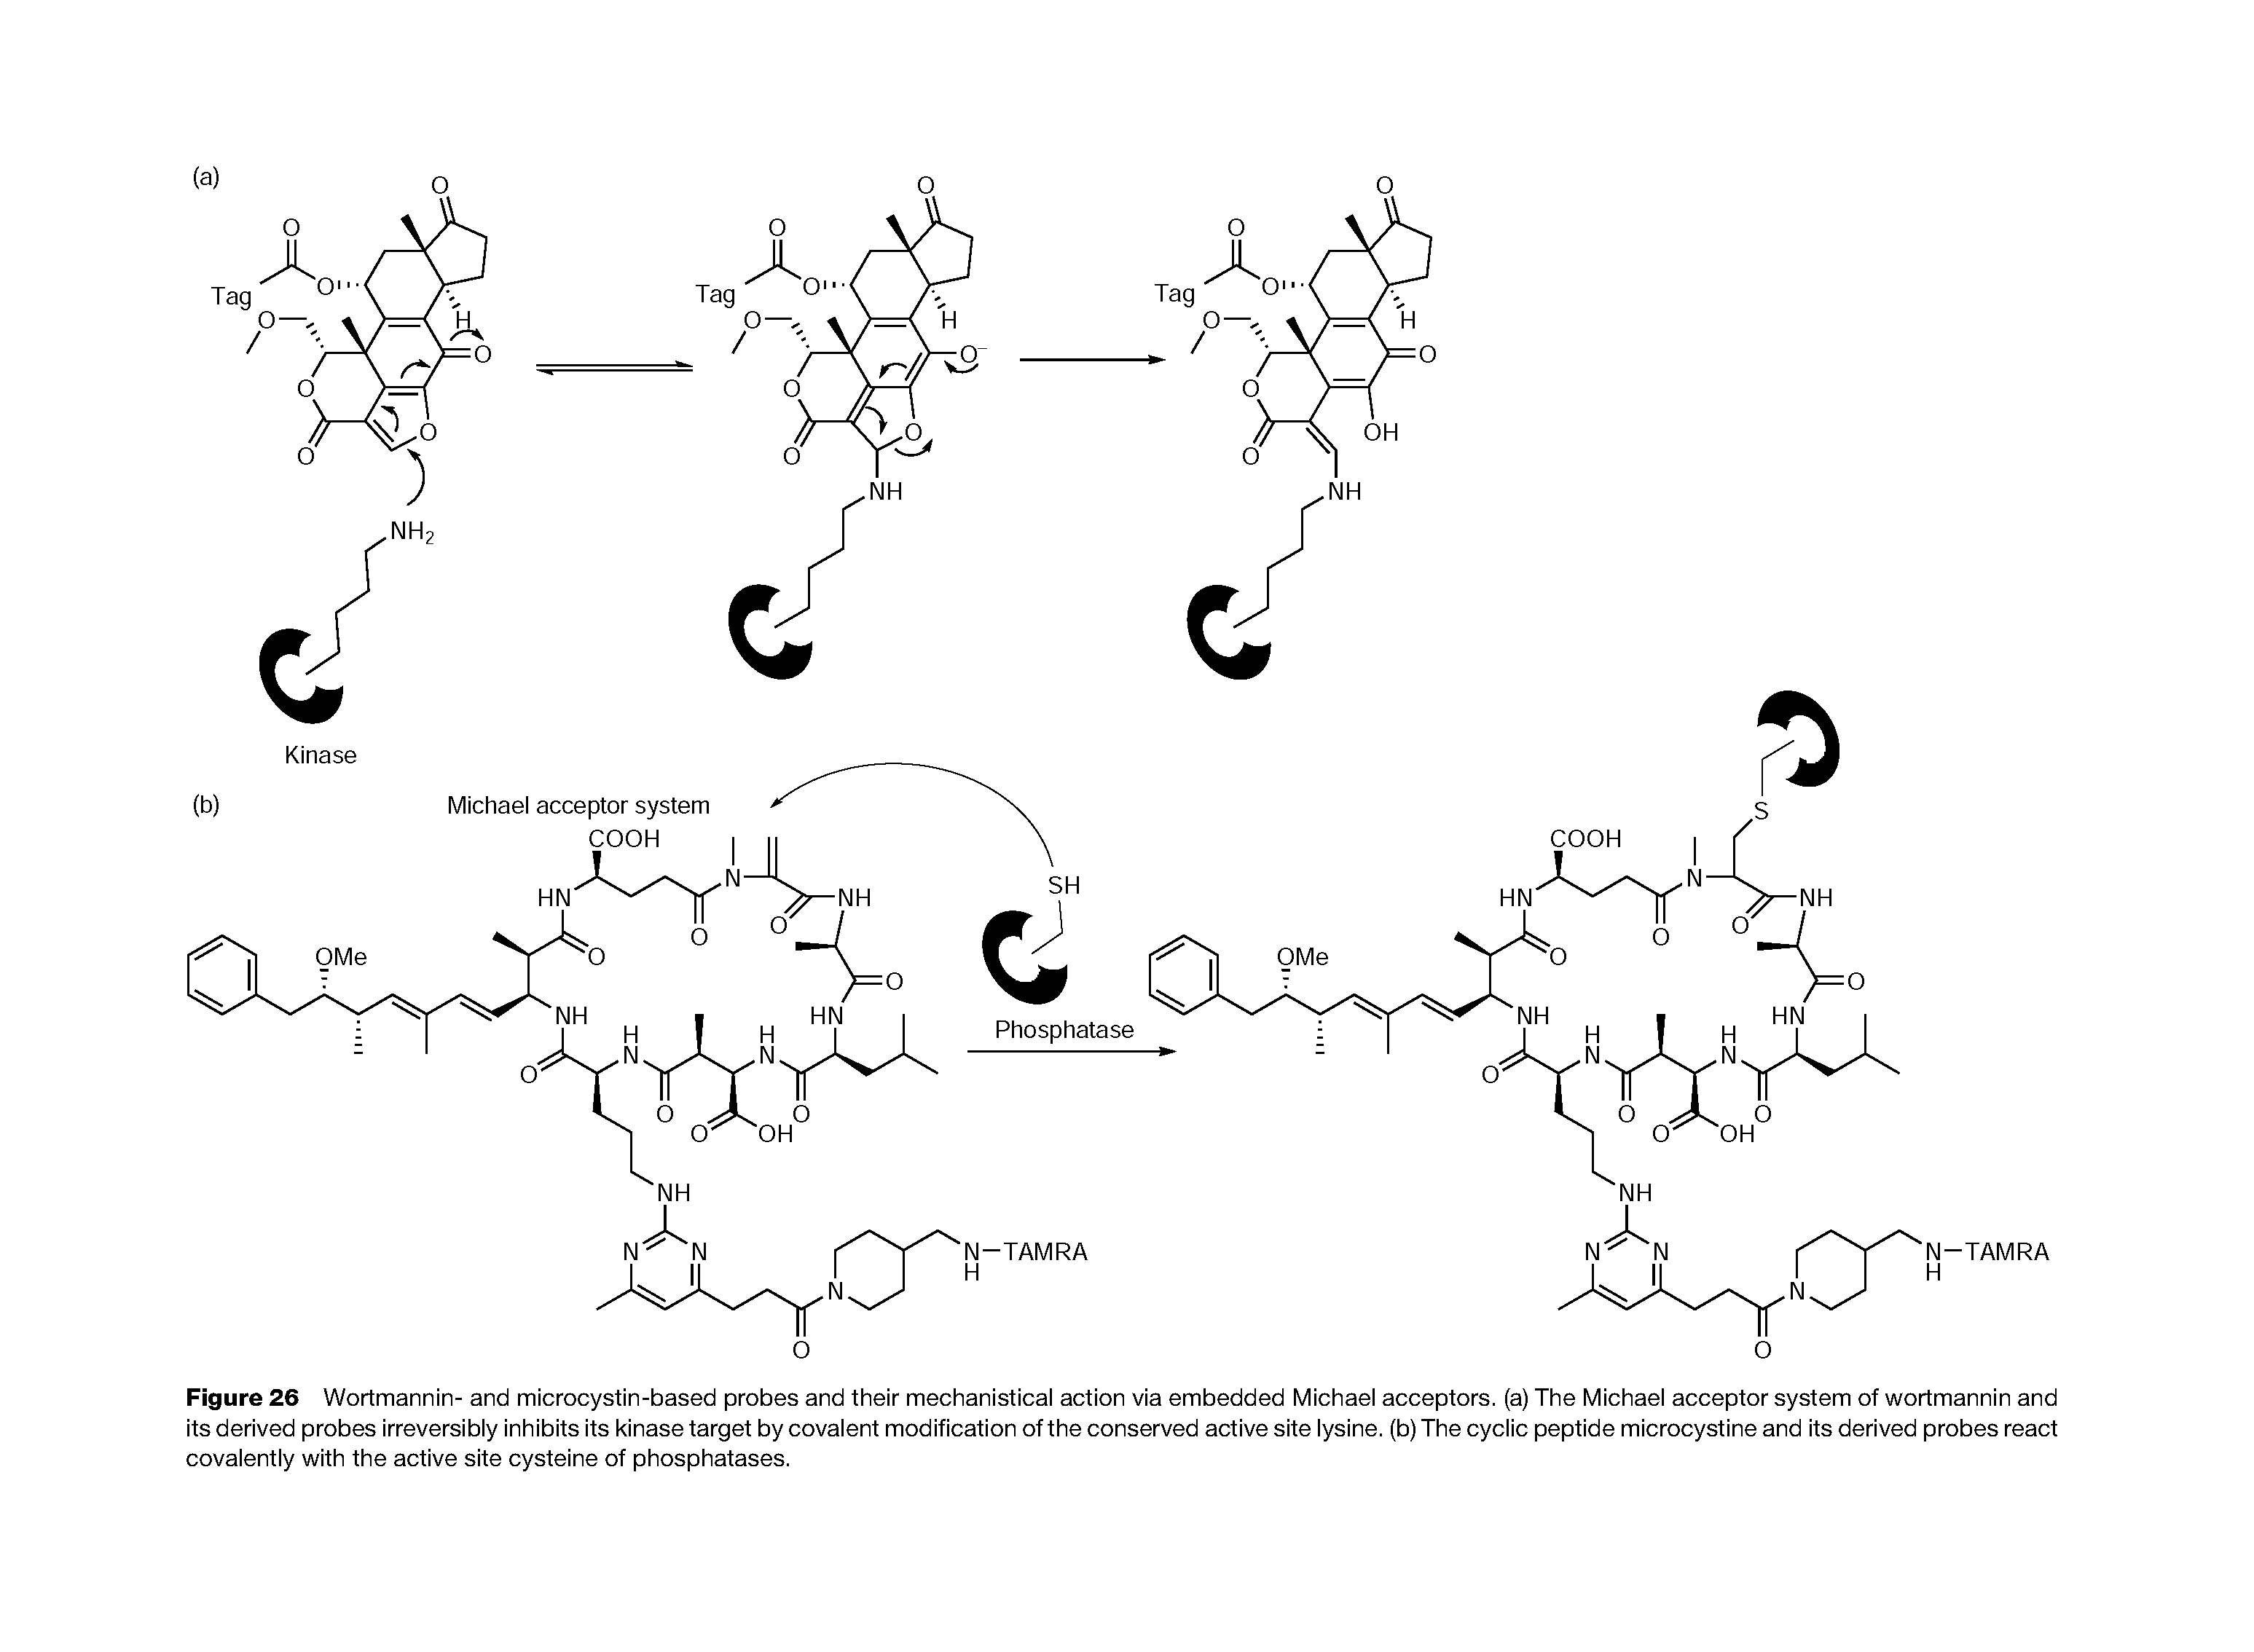 Figure 26 Wortmannin- and microcystin-based probes and their mechanistical action via embedded Michael acceptors, (a) The Michael acceptor system of wortmannin and its derived probes irreversibly inhibits its kinase target by covalent modification of the conserved active site lysine, (b) The cyclic peptide microcystine and its derived probes react covalently with the active site cysteine of phosphatases.